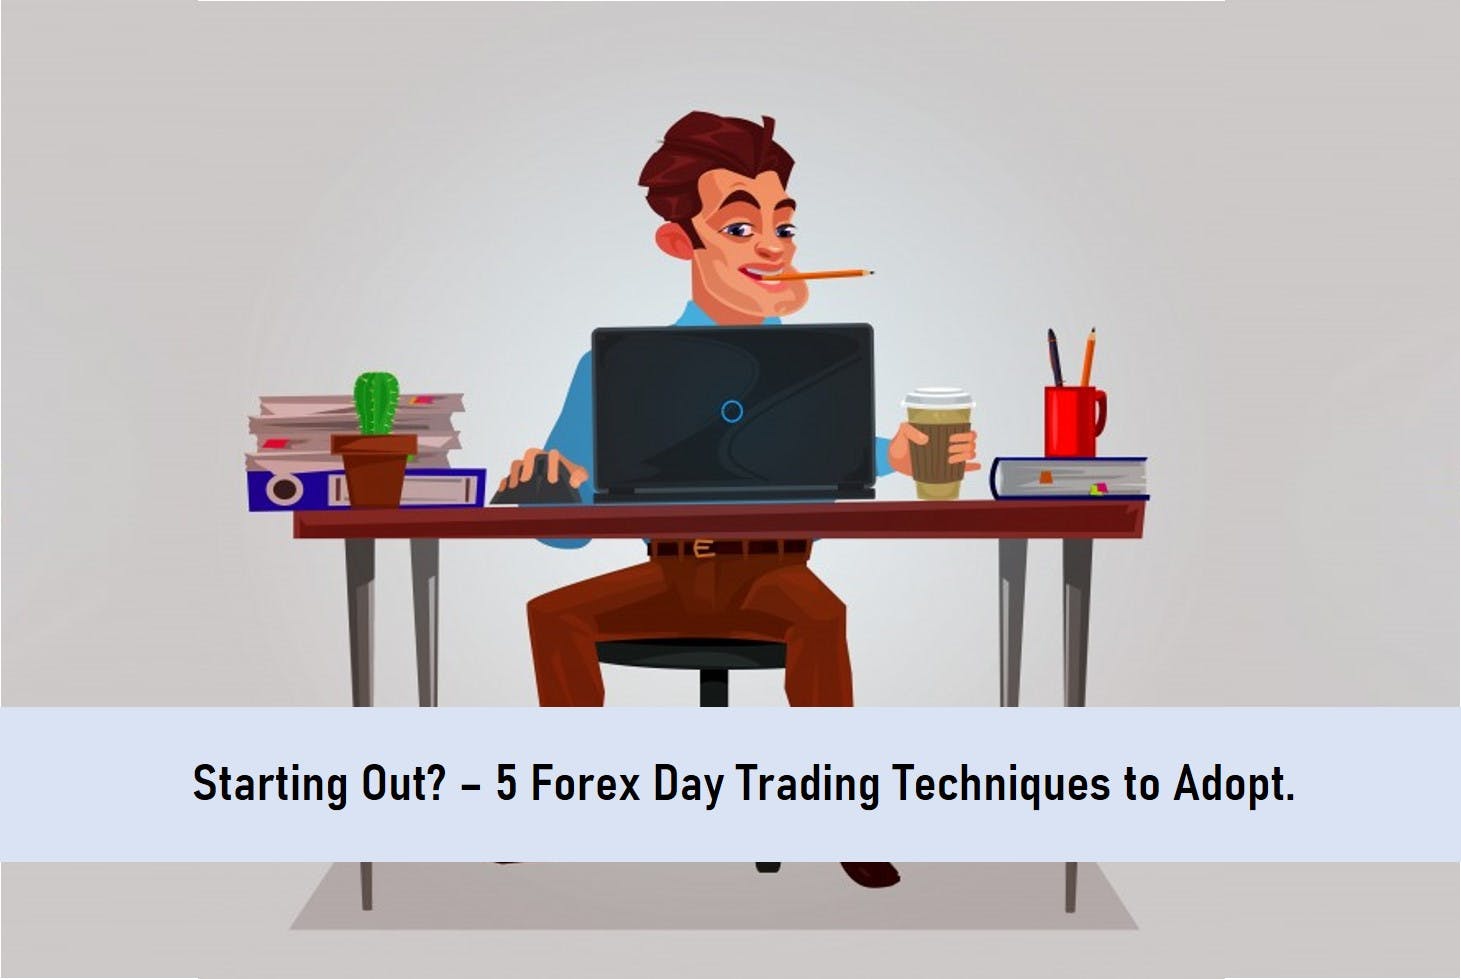 Starting Out? – 5 Forex Day Trading Techniques to Adopt.